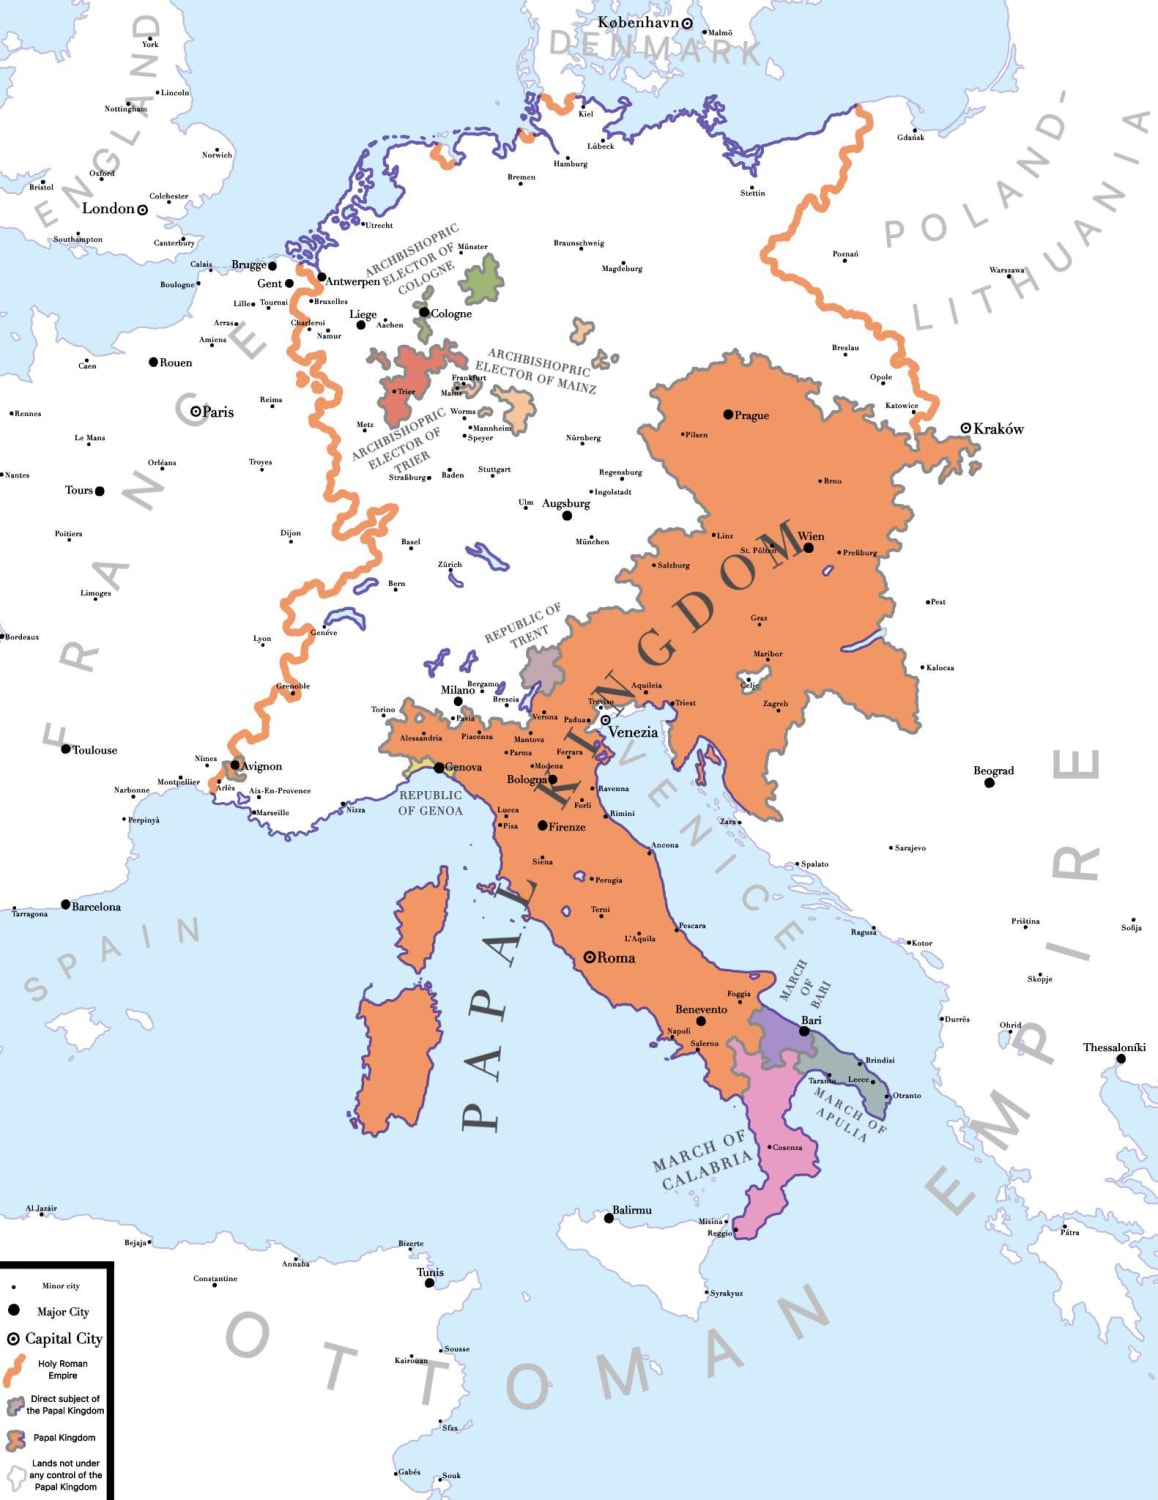 The Papal Kingdom and its Subjects in 1550